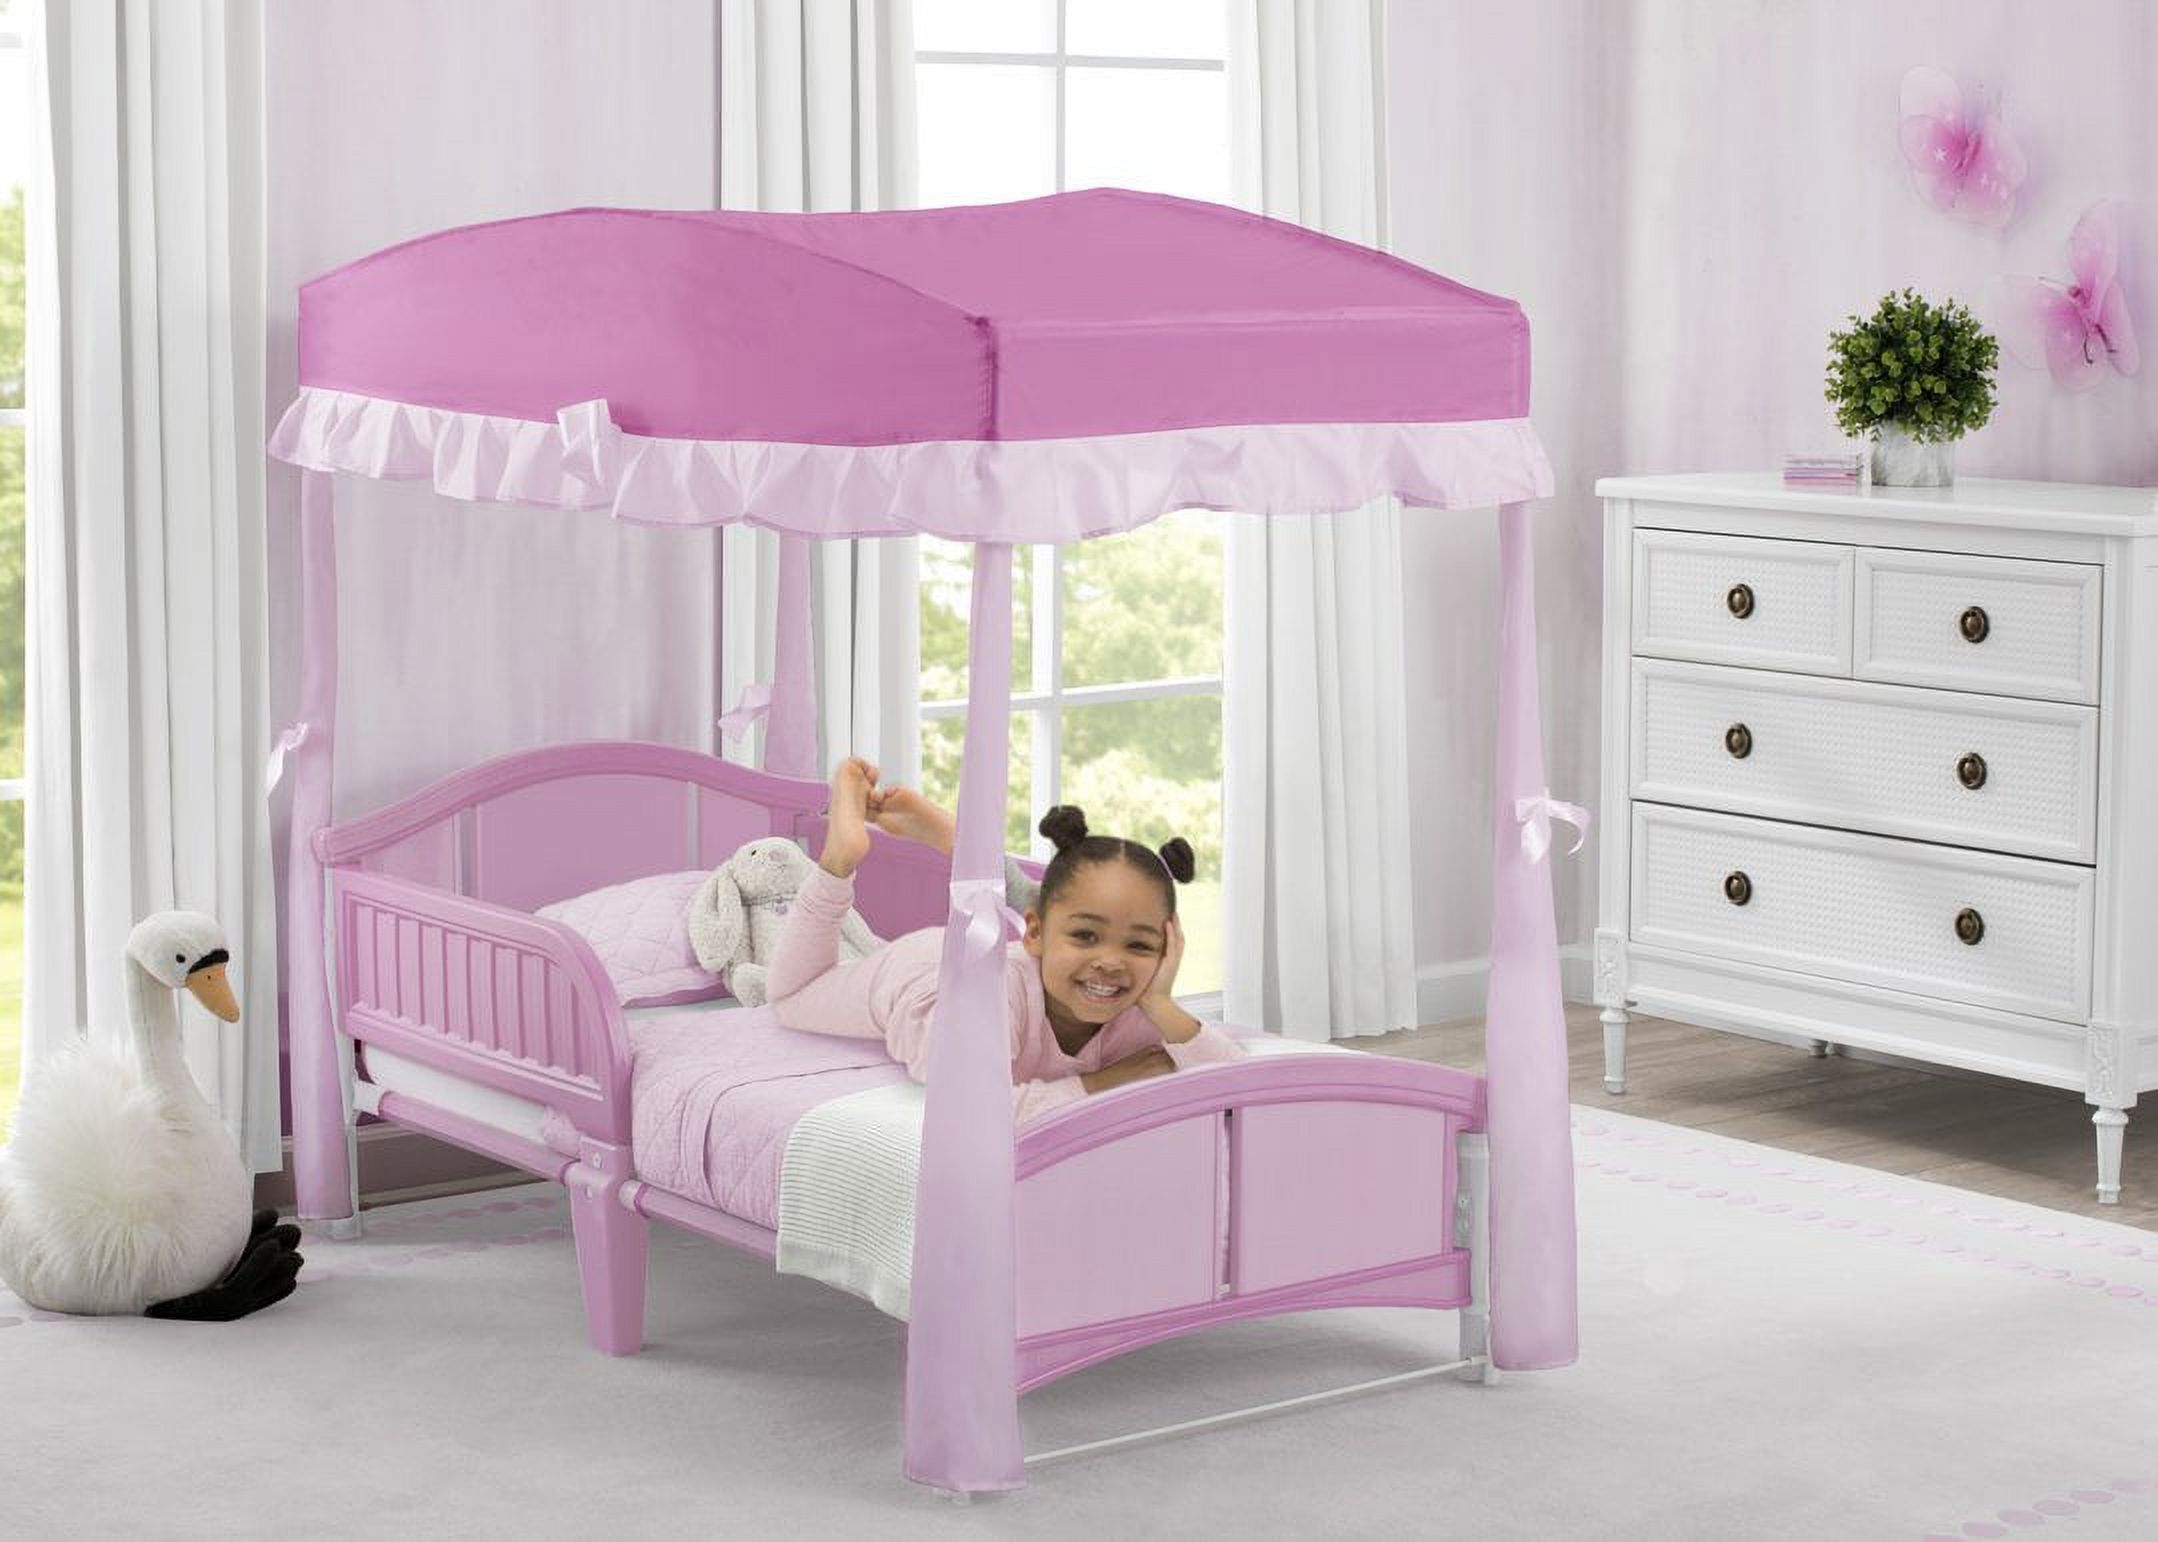 Delta Toddler Bed Canopy, Pink - image 4 of 7